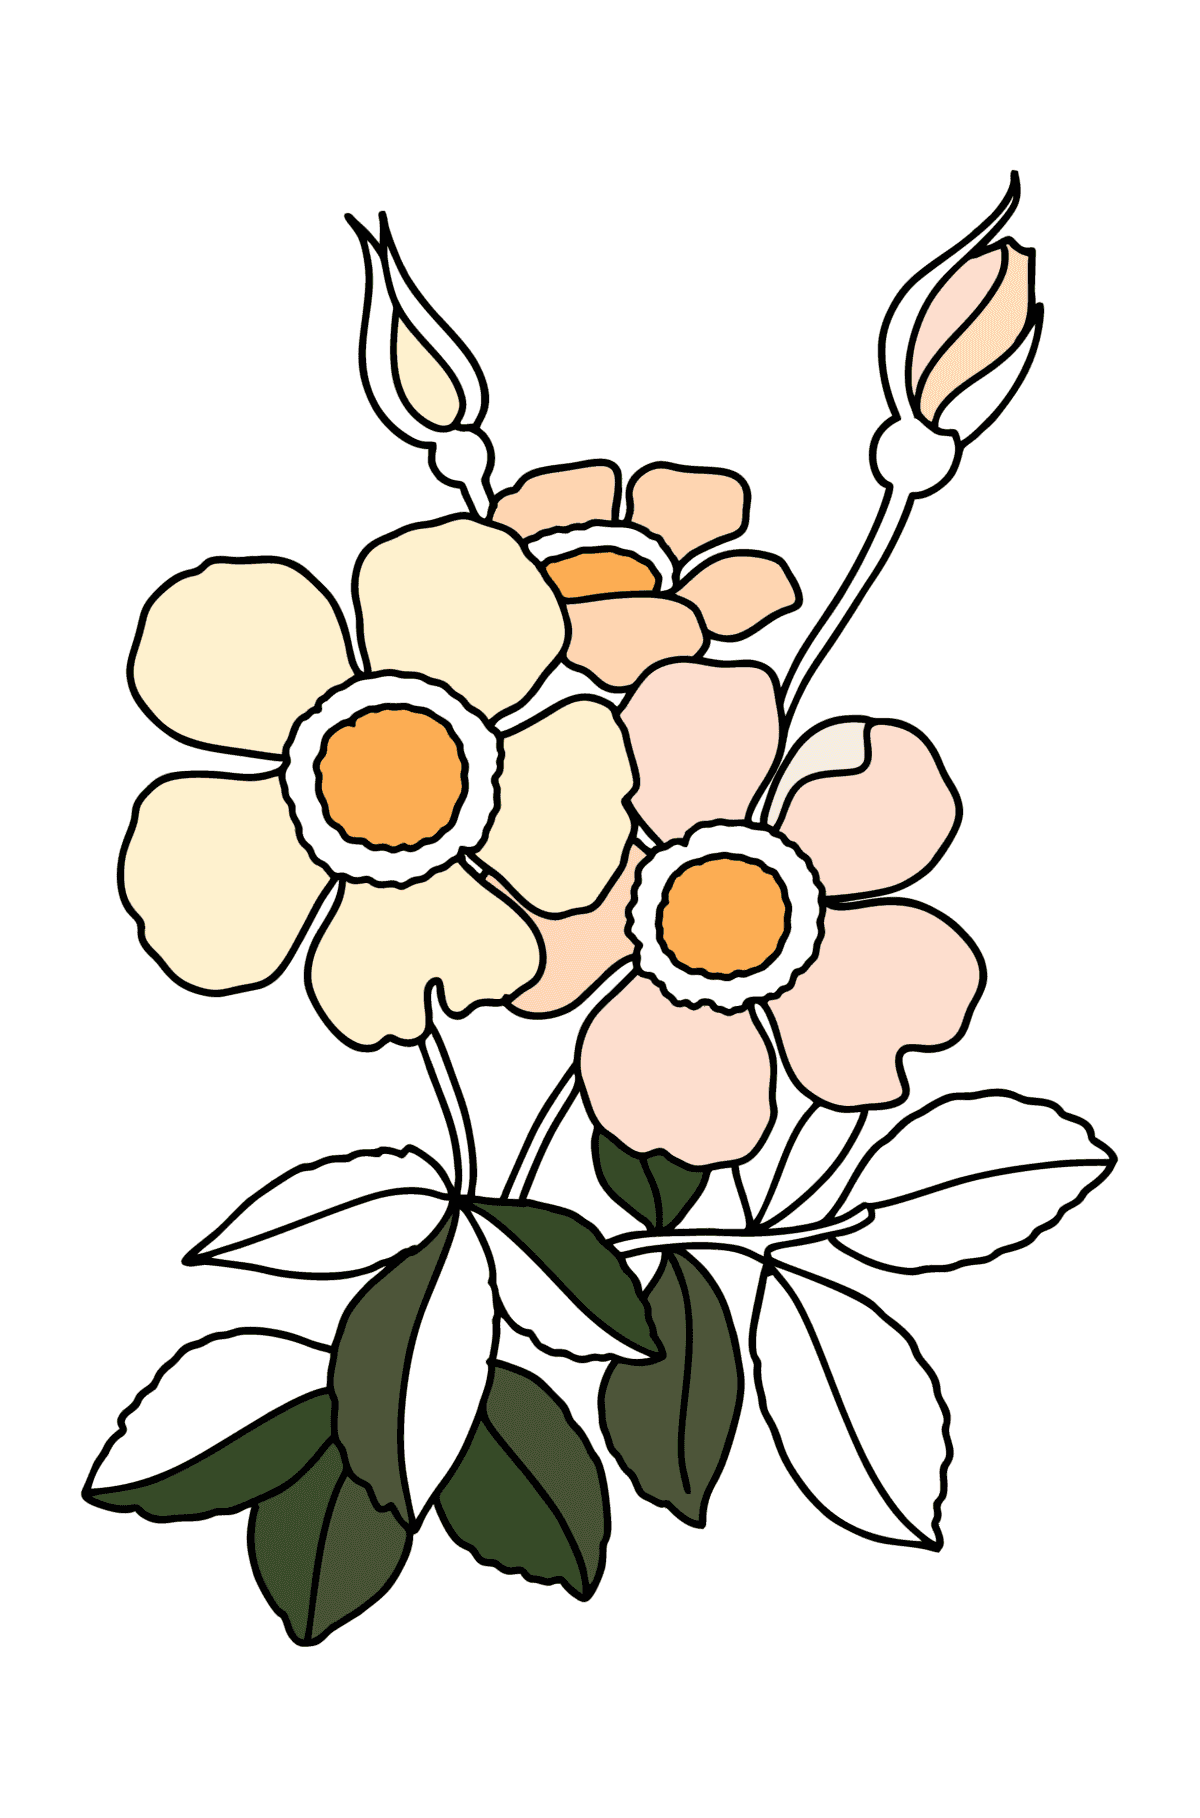 Spray rose coloring page - Coloring Pages for Kids